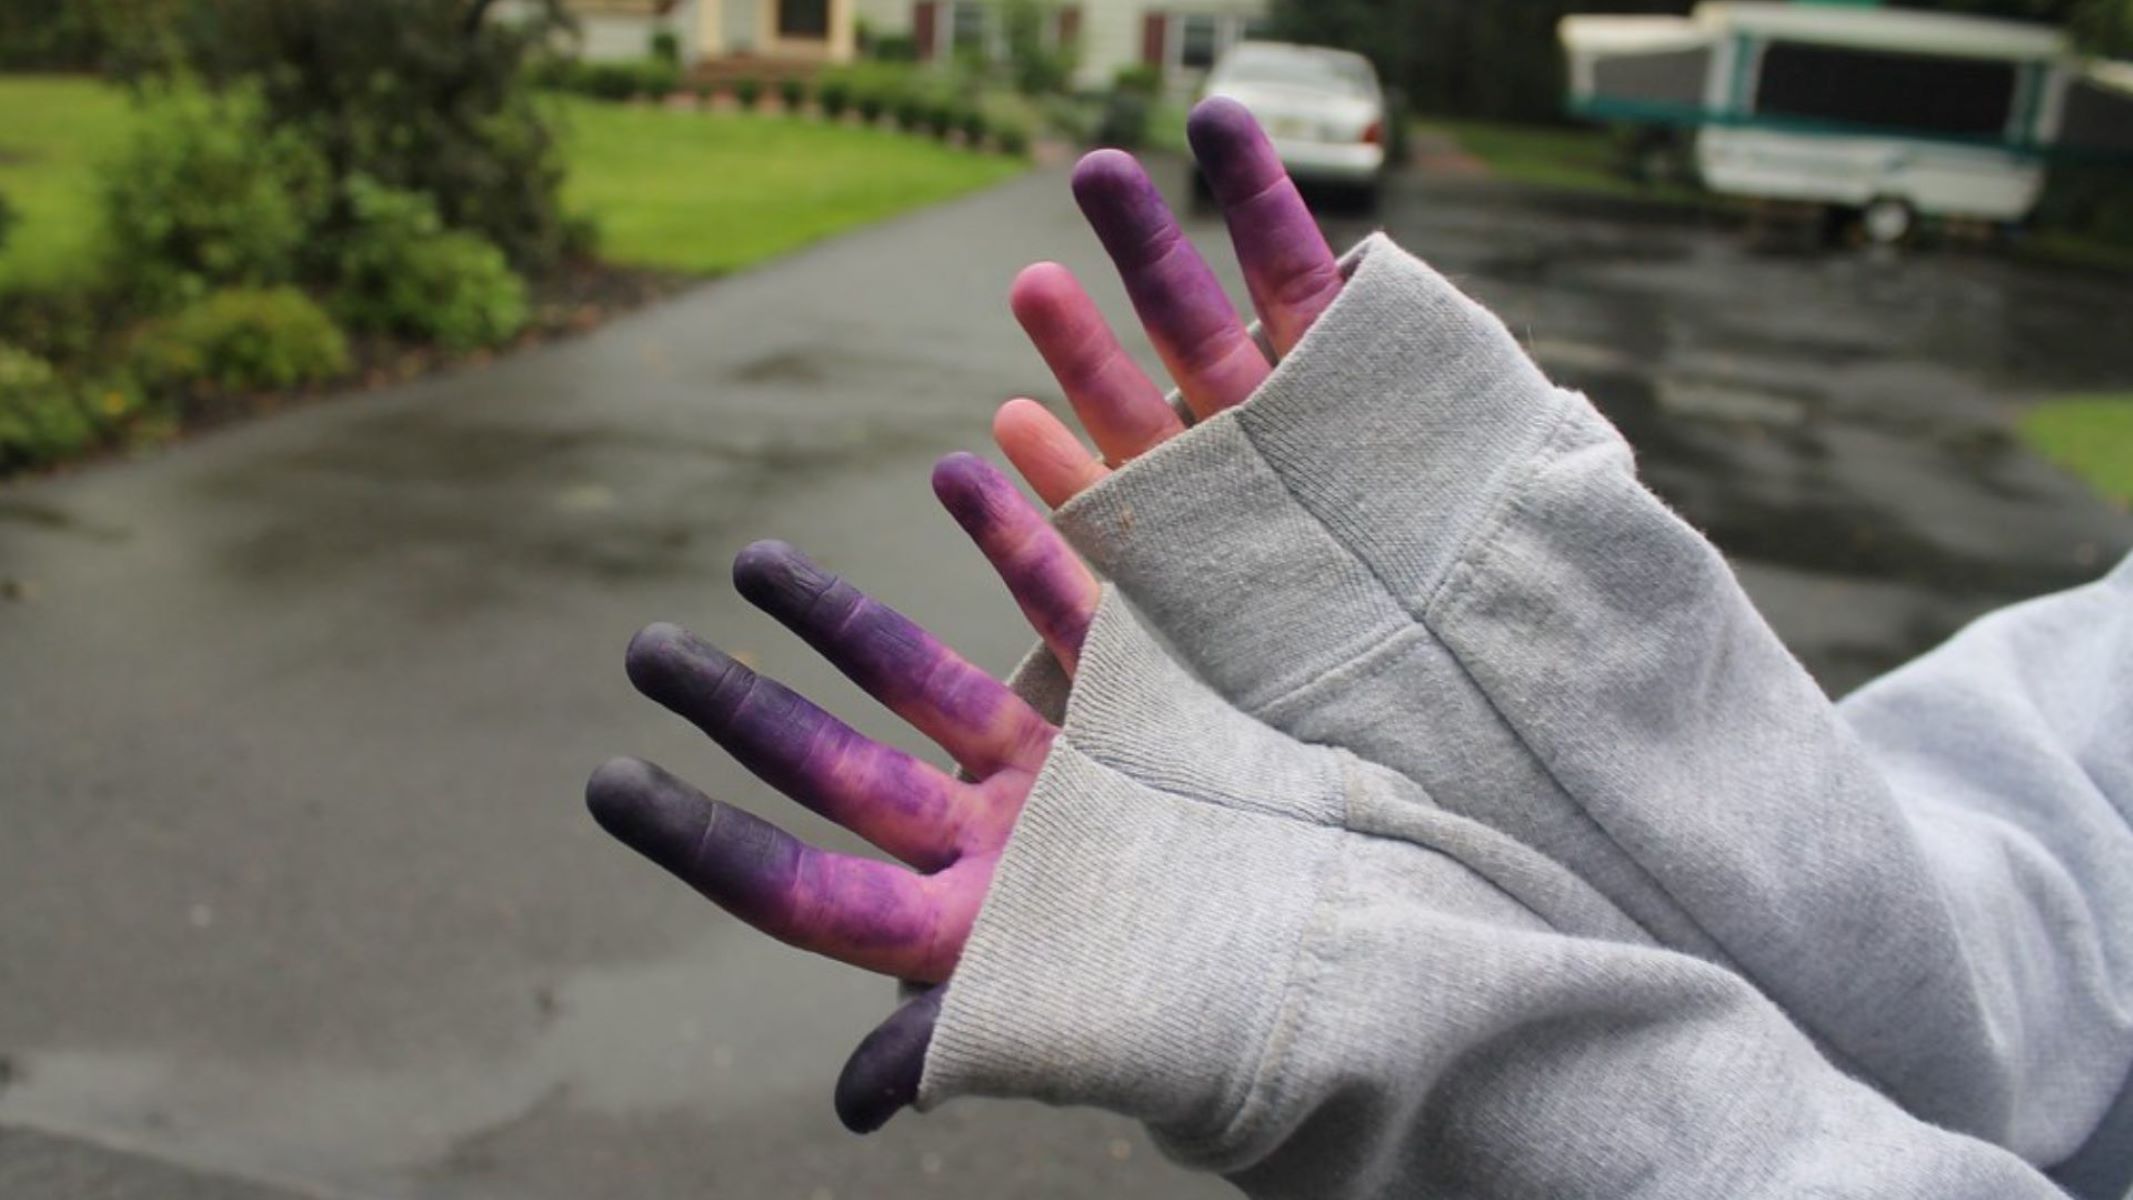 The Ultimate Hack To Remove Tie Dye Stains From Your Hands